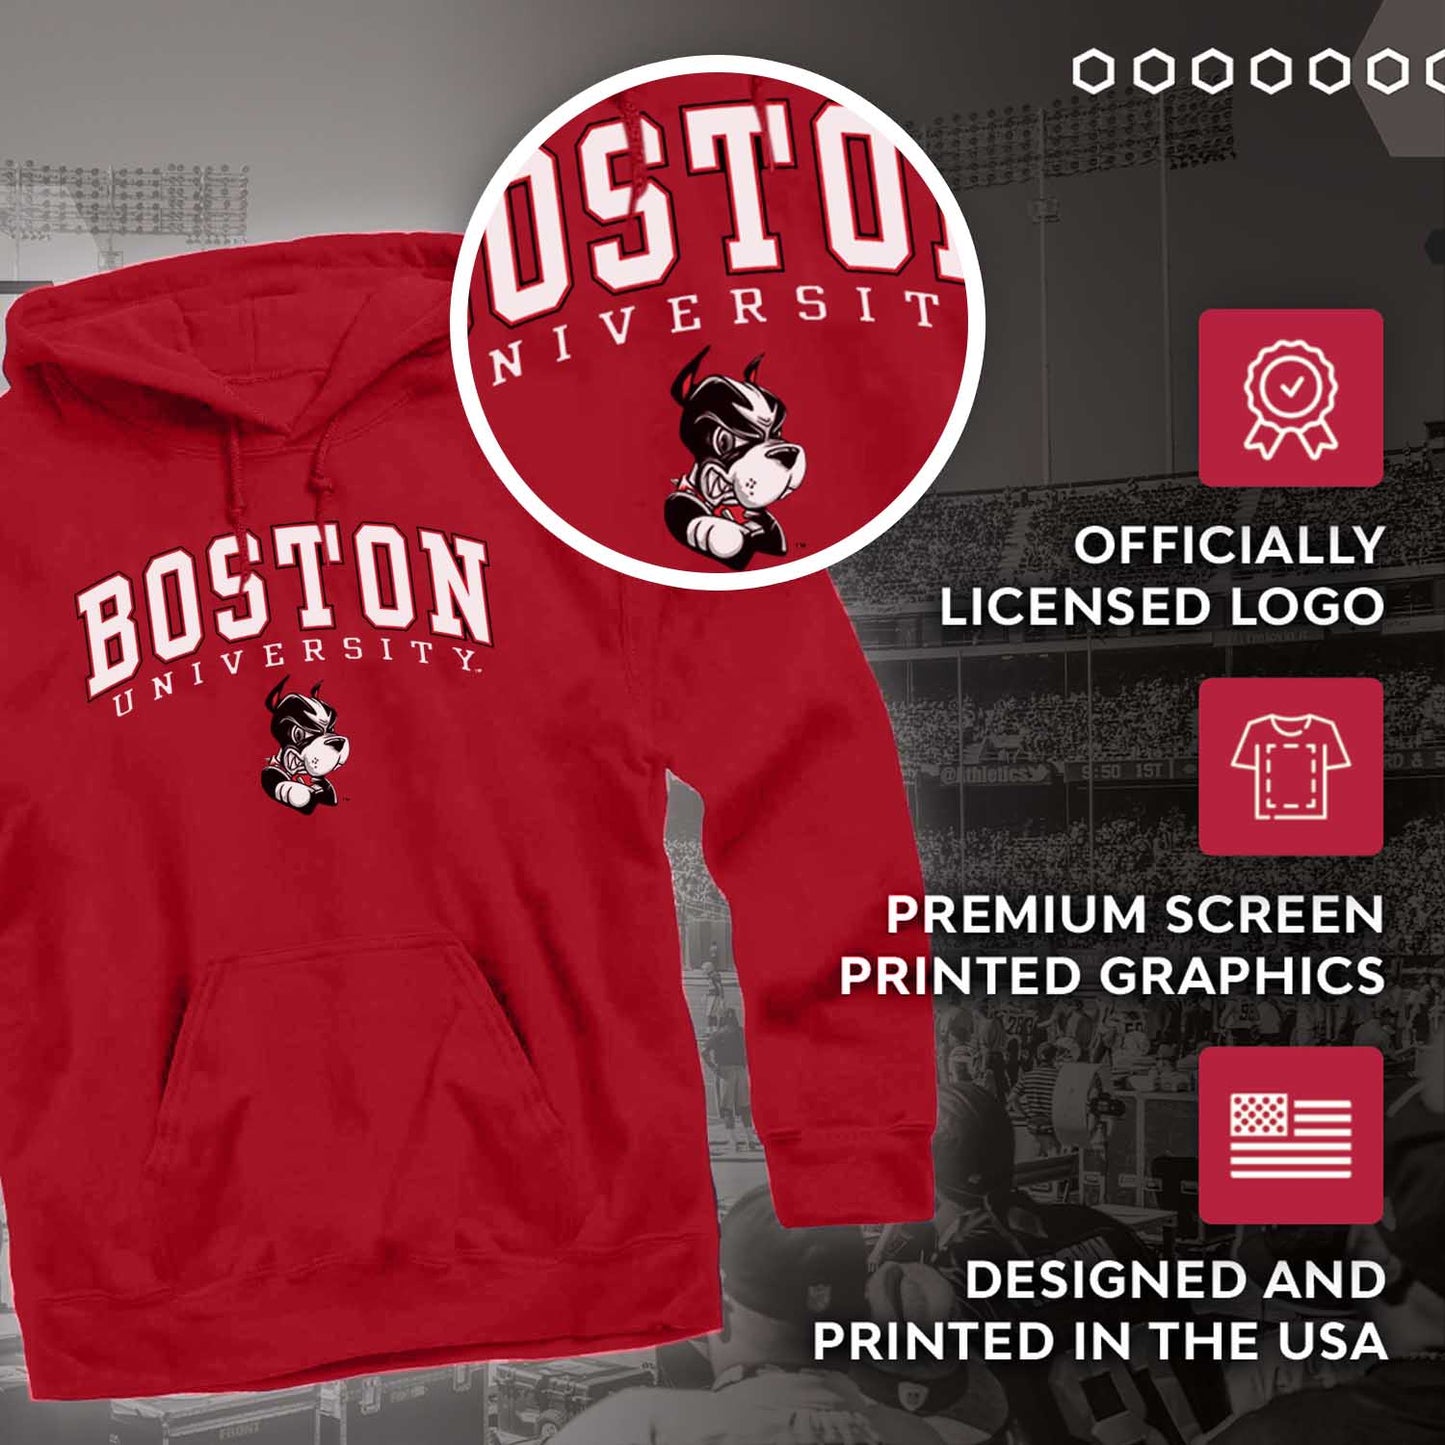 Boston Terriers Adult Arch & Logo Soft Style Gameday Hooded Sweatshirt - Red